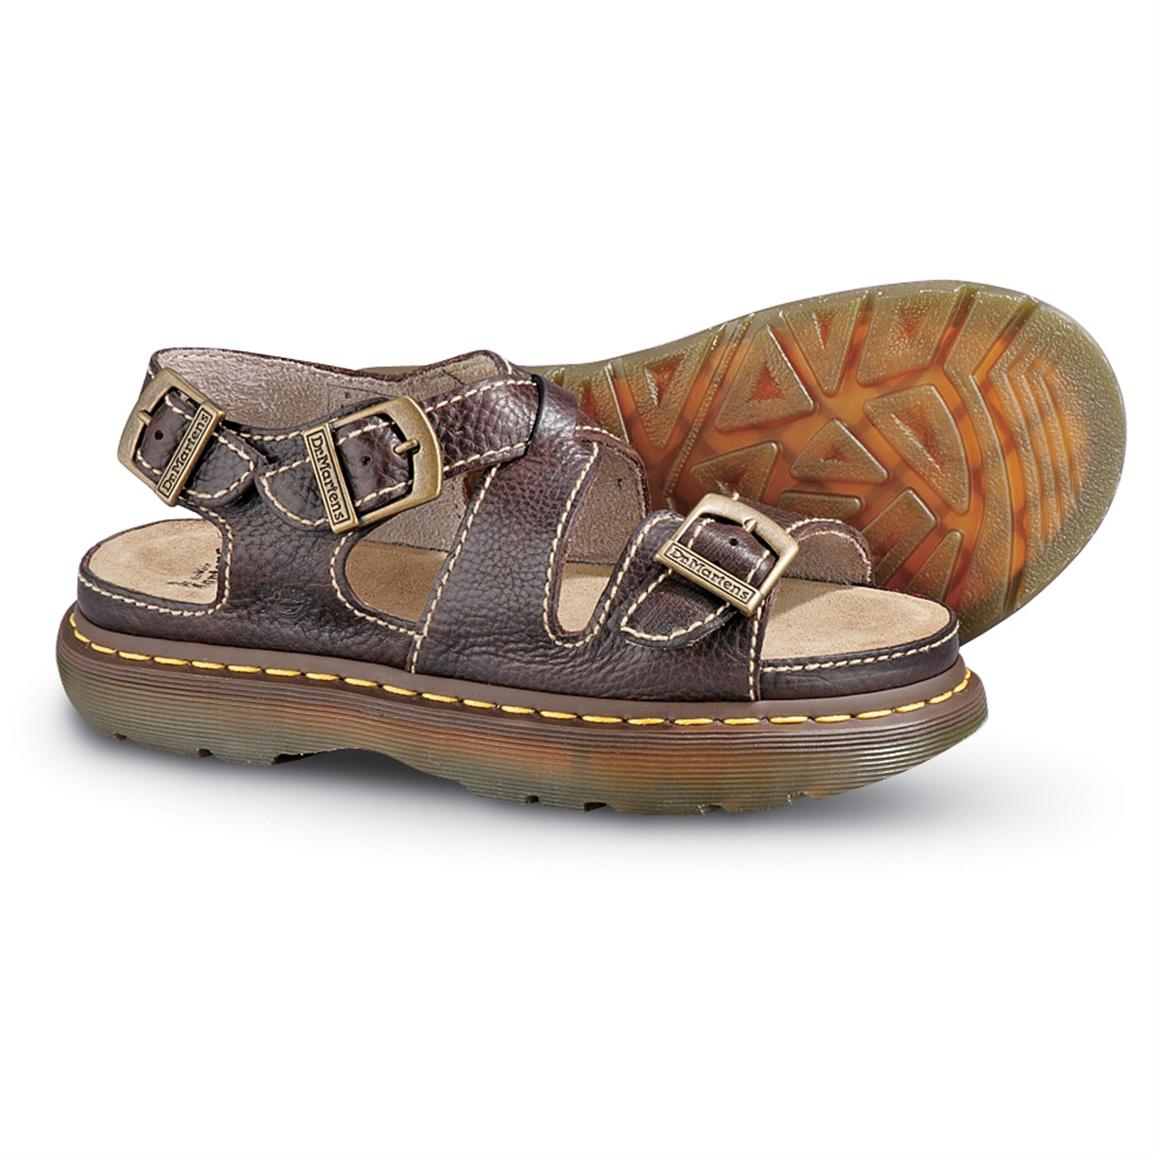 Dr Martens Sandals Mens / Dr. Martens Leather Kennet Sandals In Tan in Brown for Men ... / Our leather sandals are built tough like our boots.